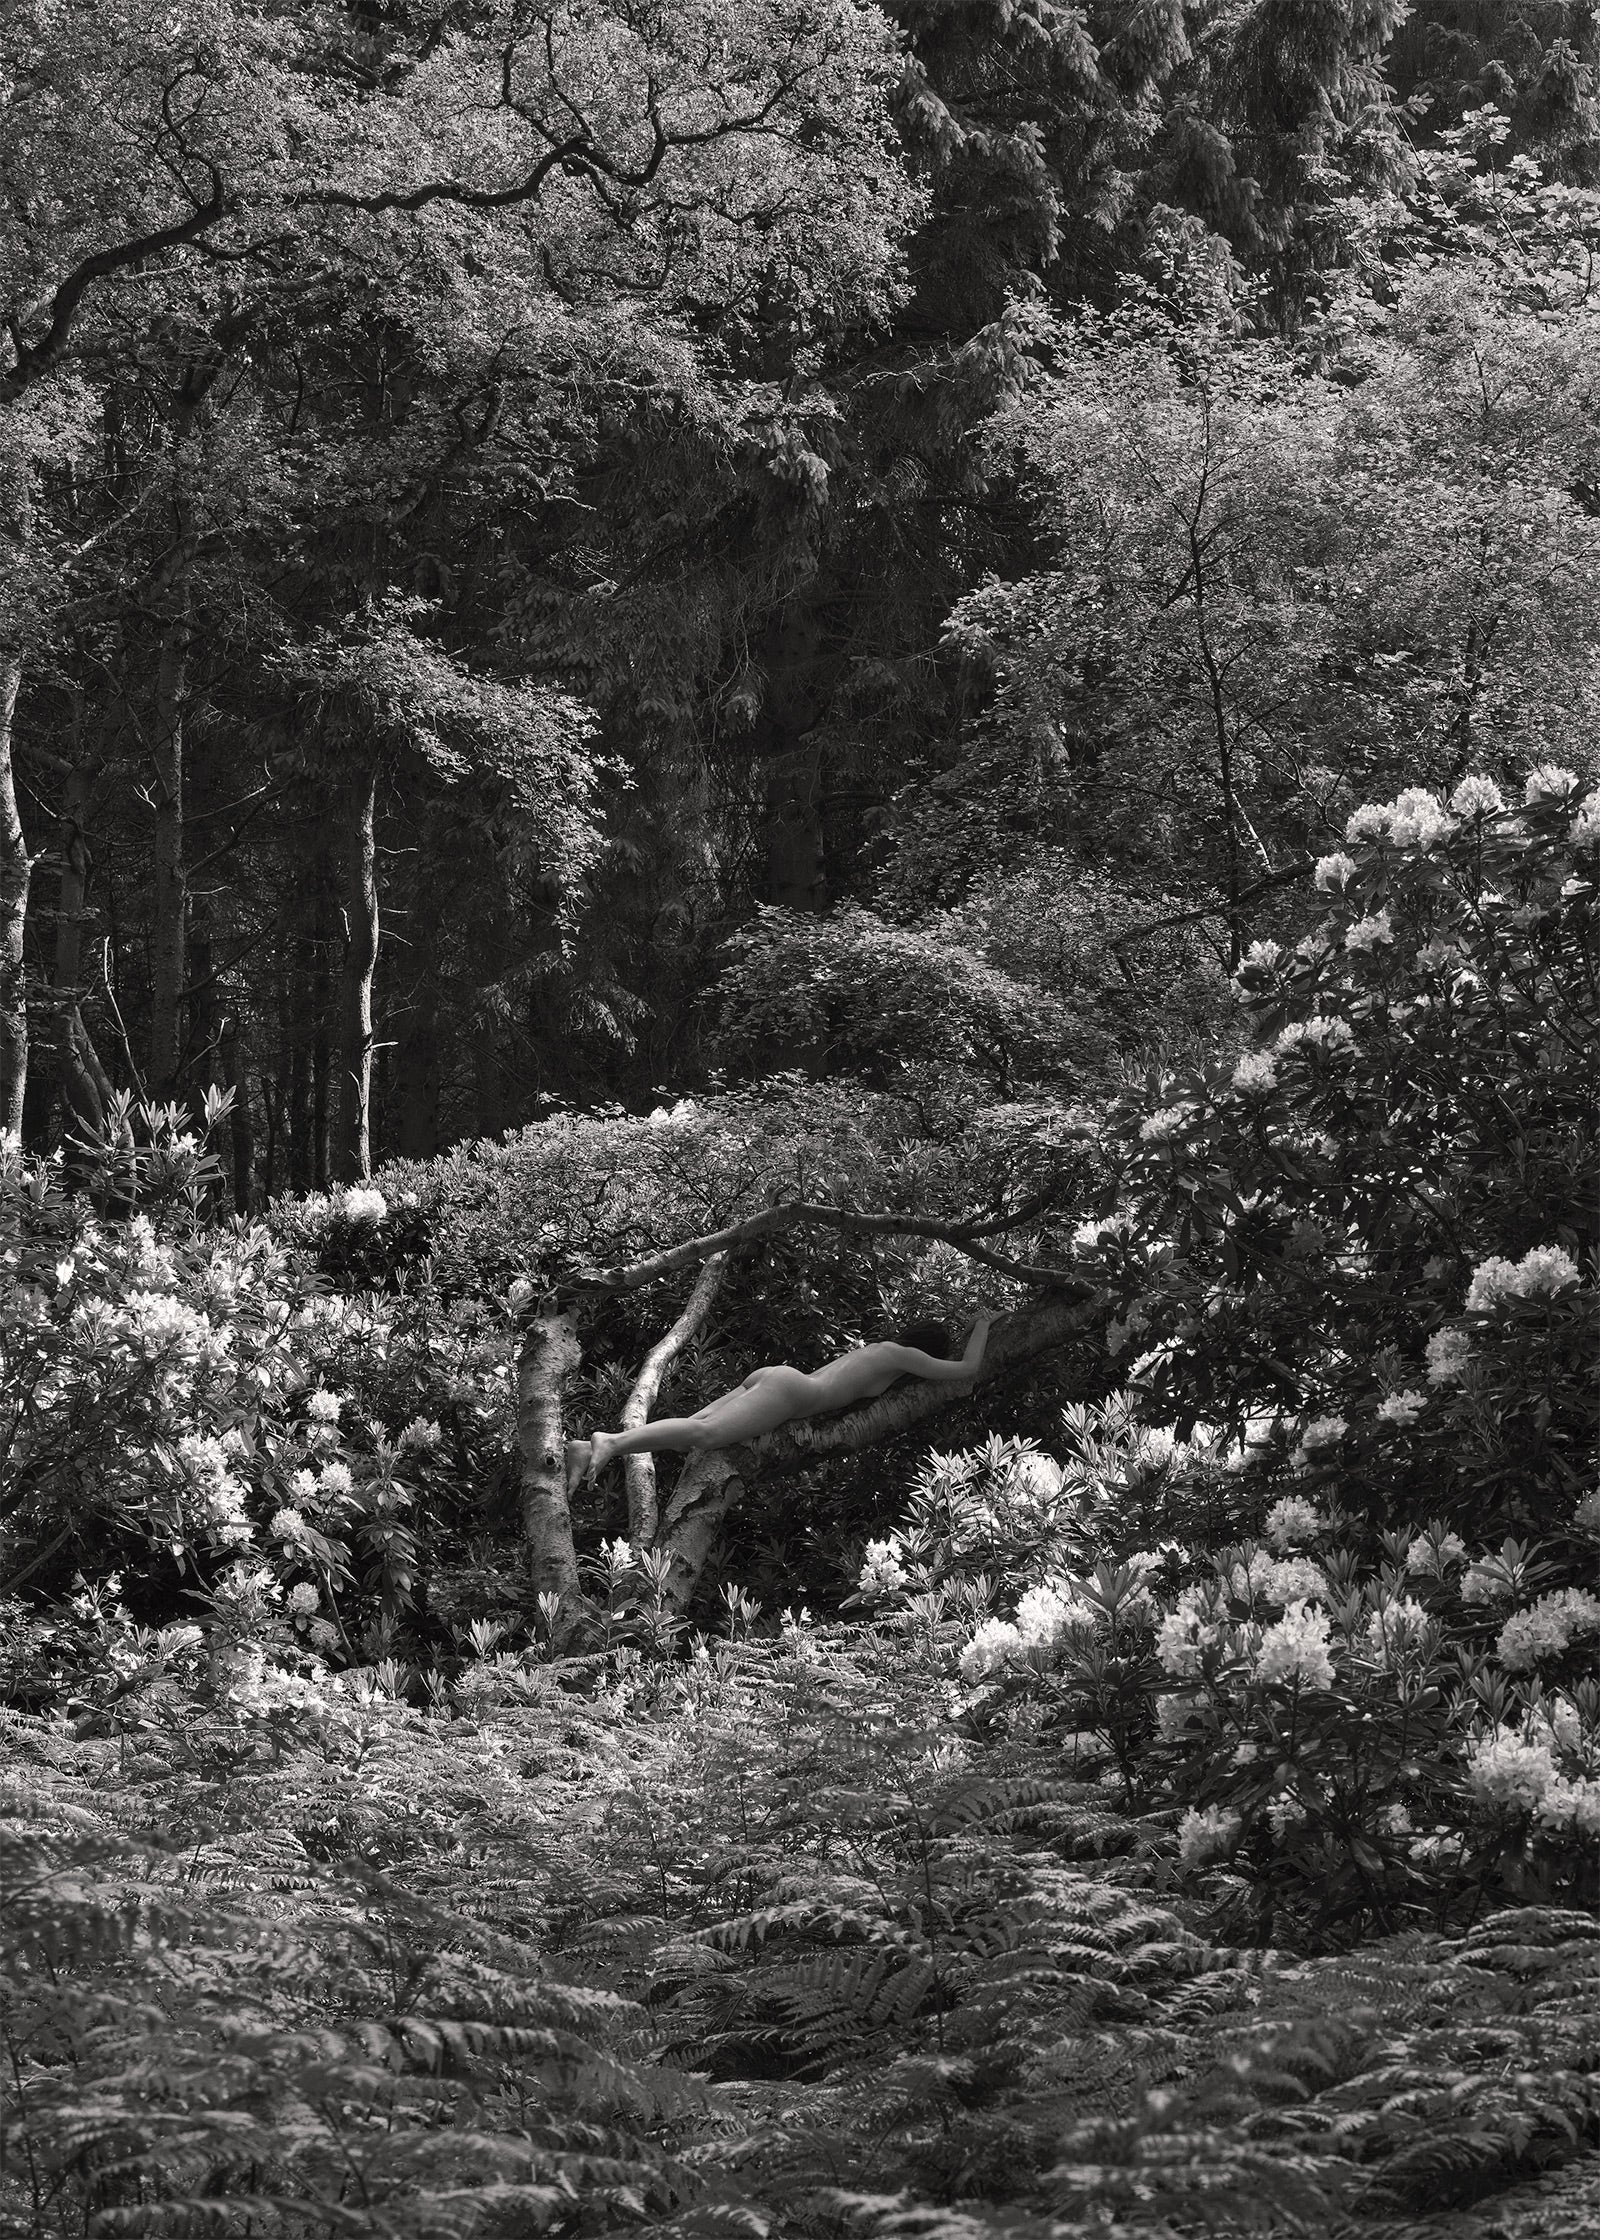 Black and white image of a nude figure reclining on a branch surrounded by rhododendrons by Gabriela Silveira